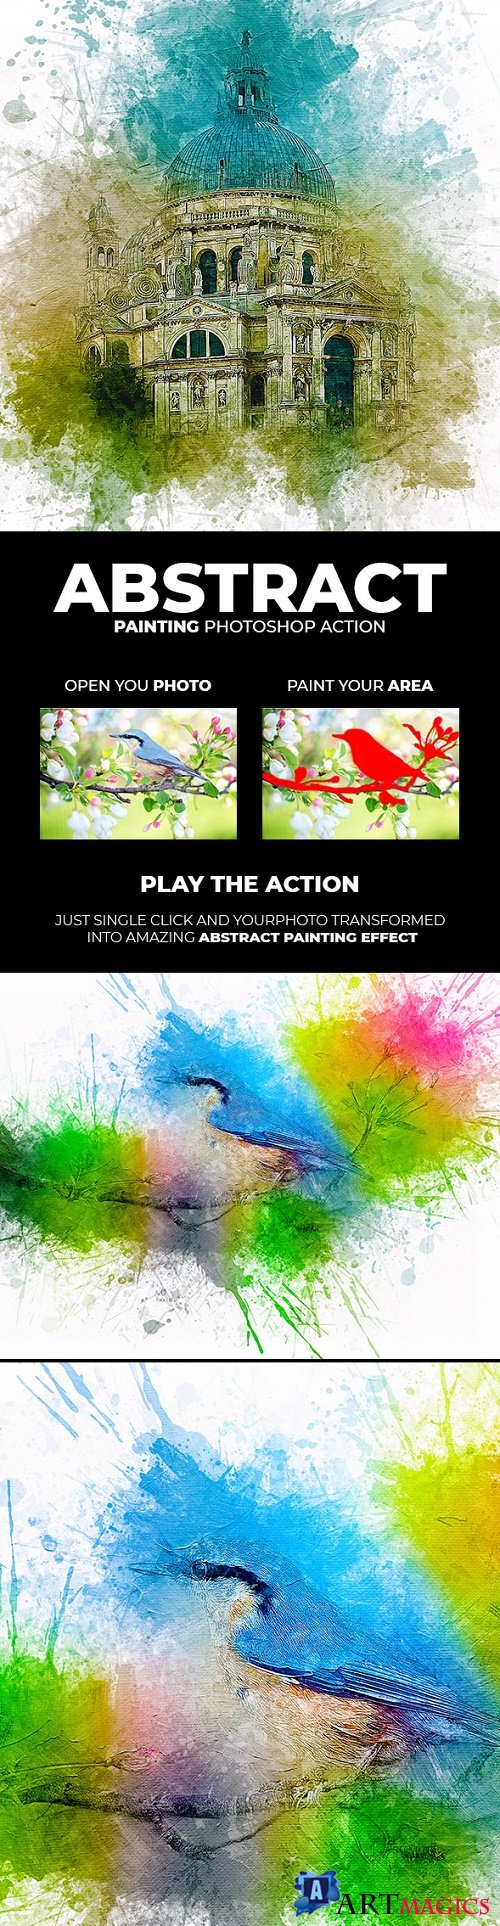 Abstract Painting Photoshop Action 21714322